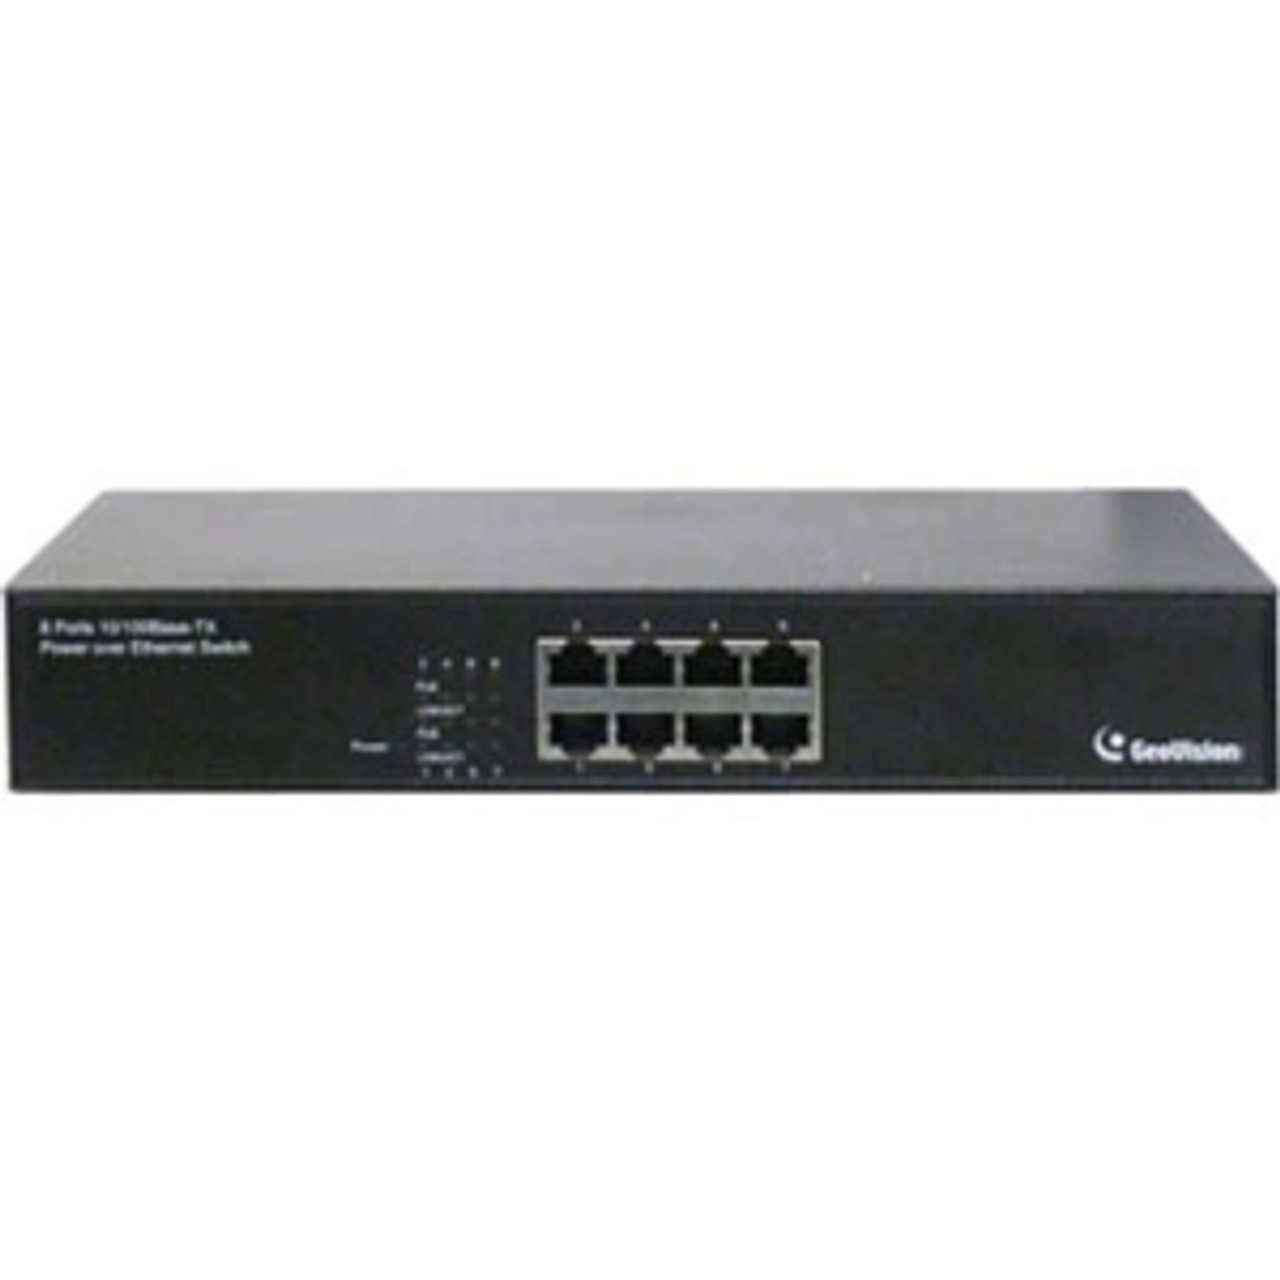 GV-POE0800 GeoVision 8-Port 802.3at PoE Switch 2 Layer Supported Rack-mountable, Under Table, Desktop (Refurbished)